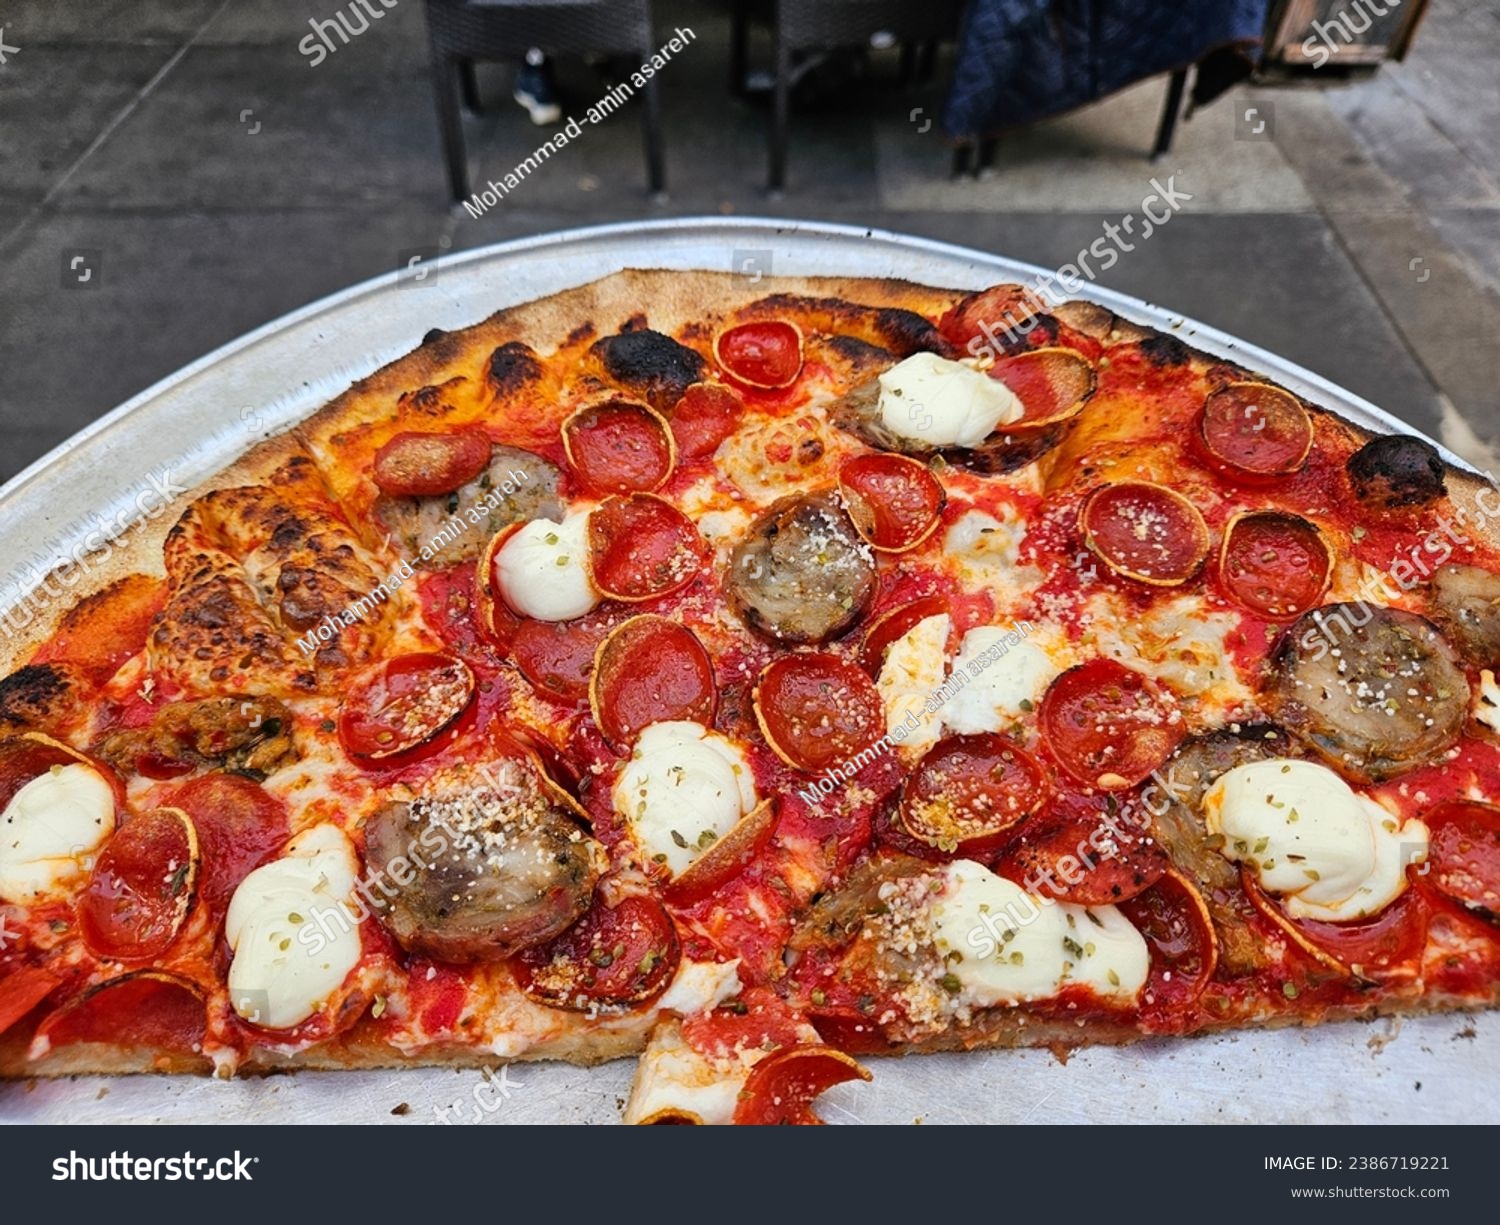 Famous Pizza place in the Italian district of san Francisco California referred to as Tony's Pizza #2386719221